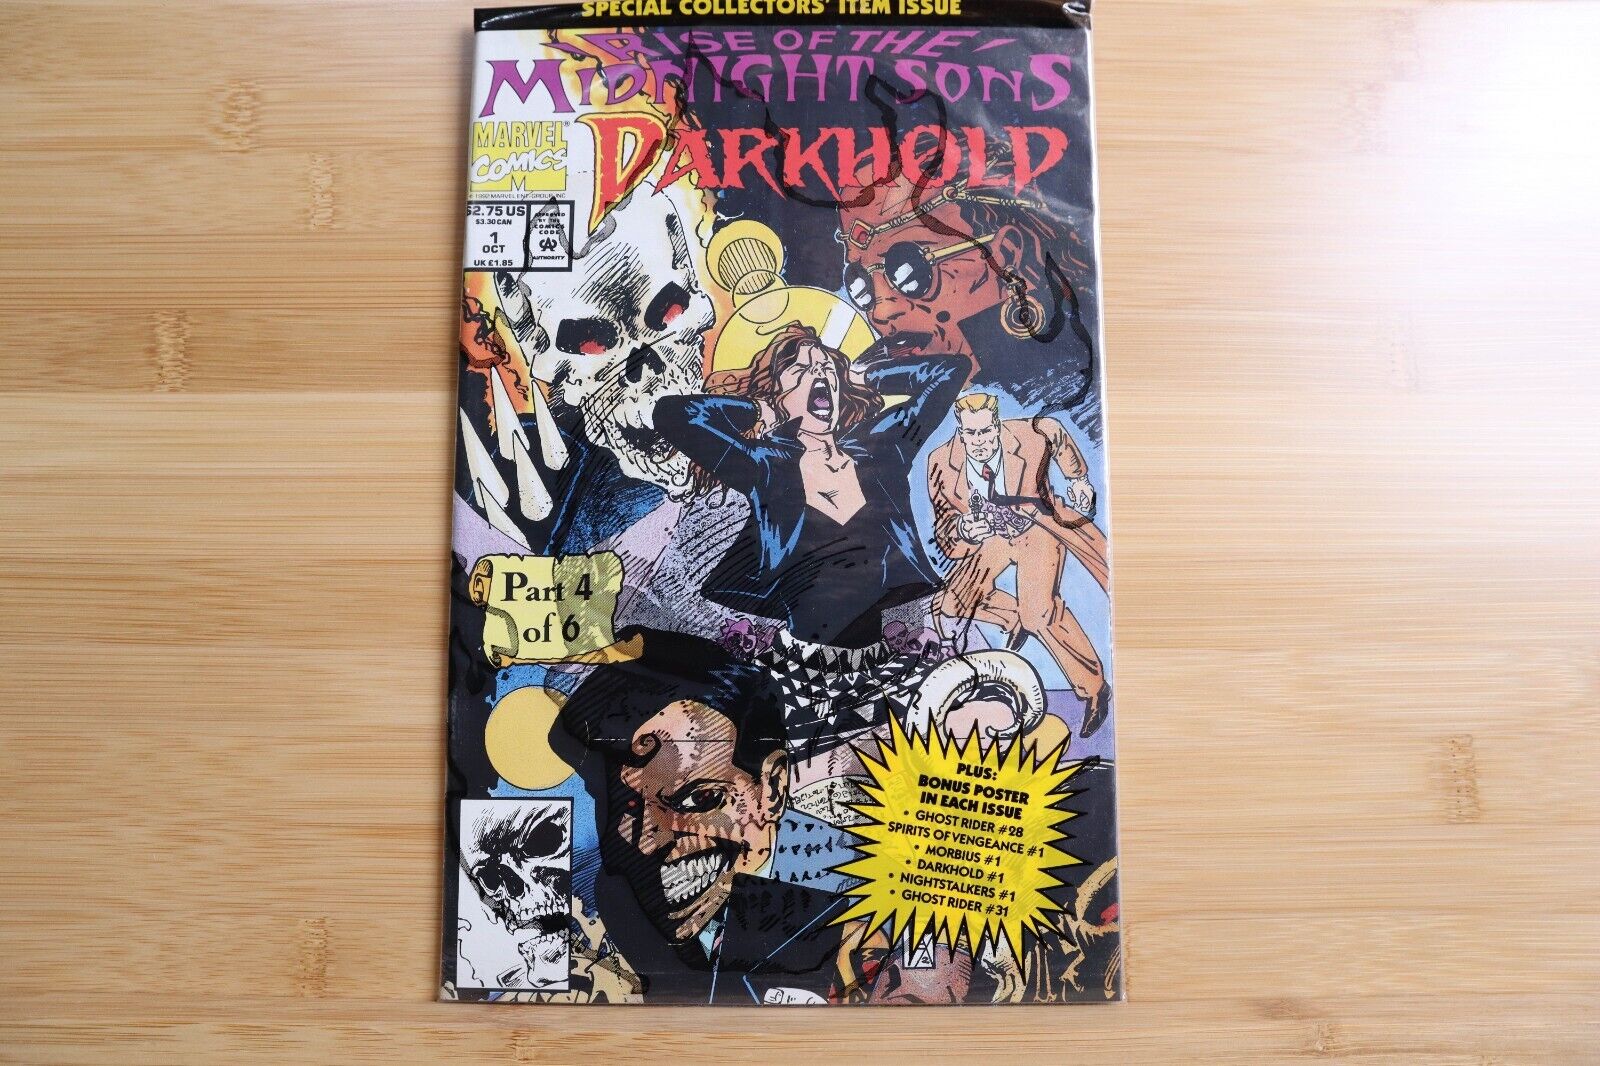 Rise of the Midnight Sons Darkhold #1 Part 4 of 6 SEALED - 1992